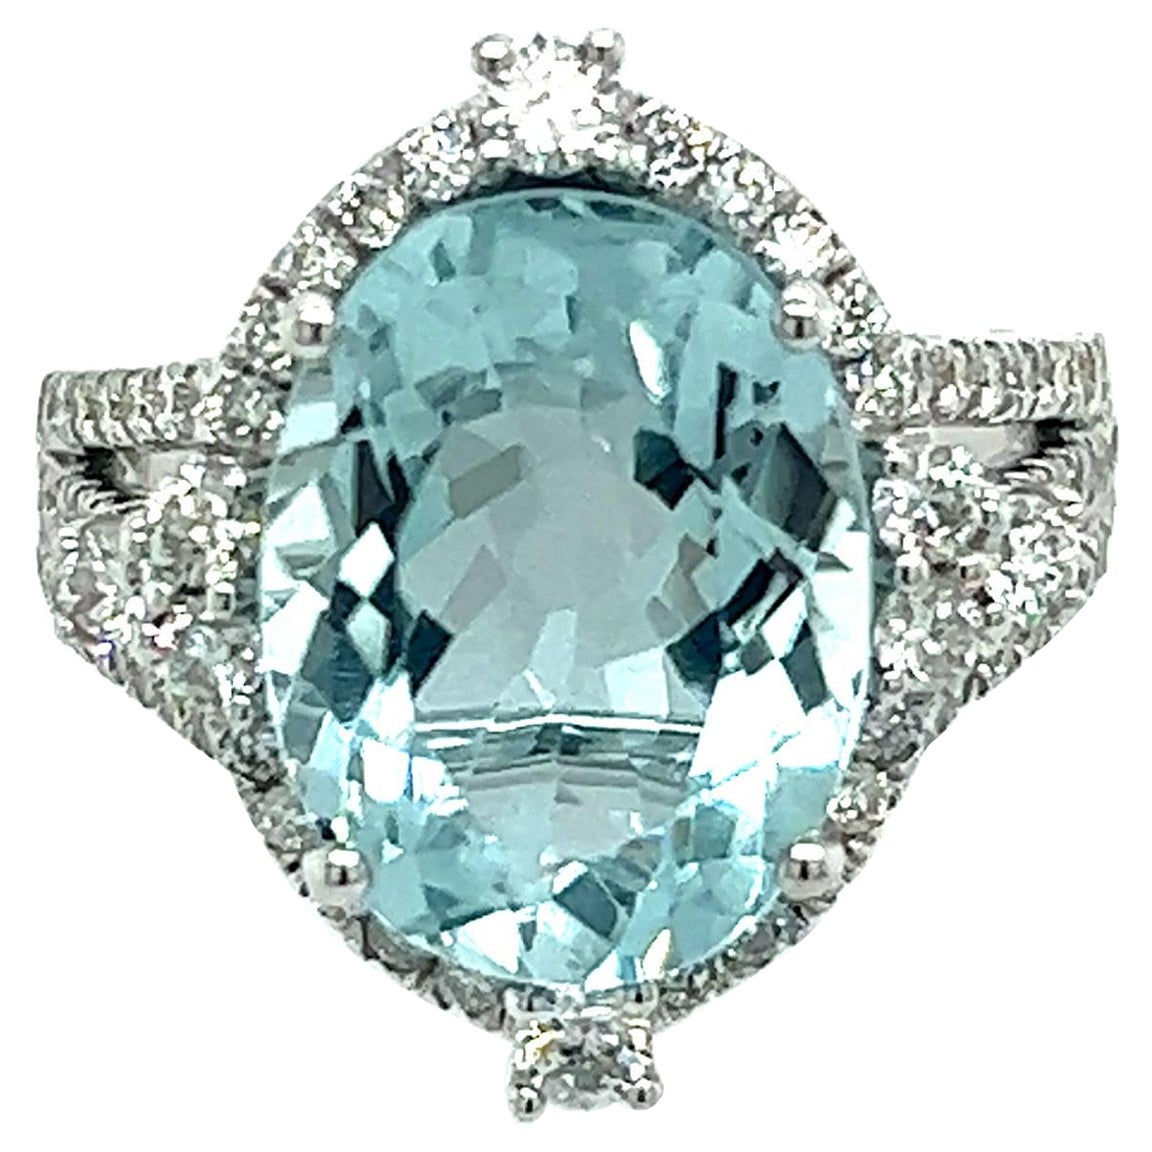 Natural Aquamarine Diamond Ring 14k W Gold 6.58 TCW Certified For Sale